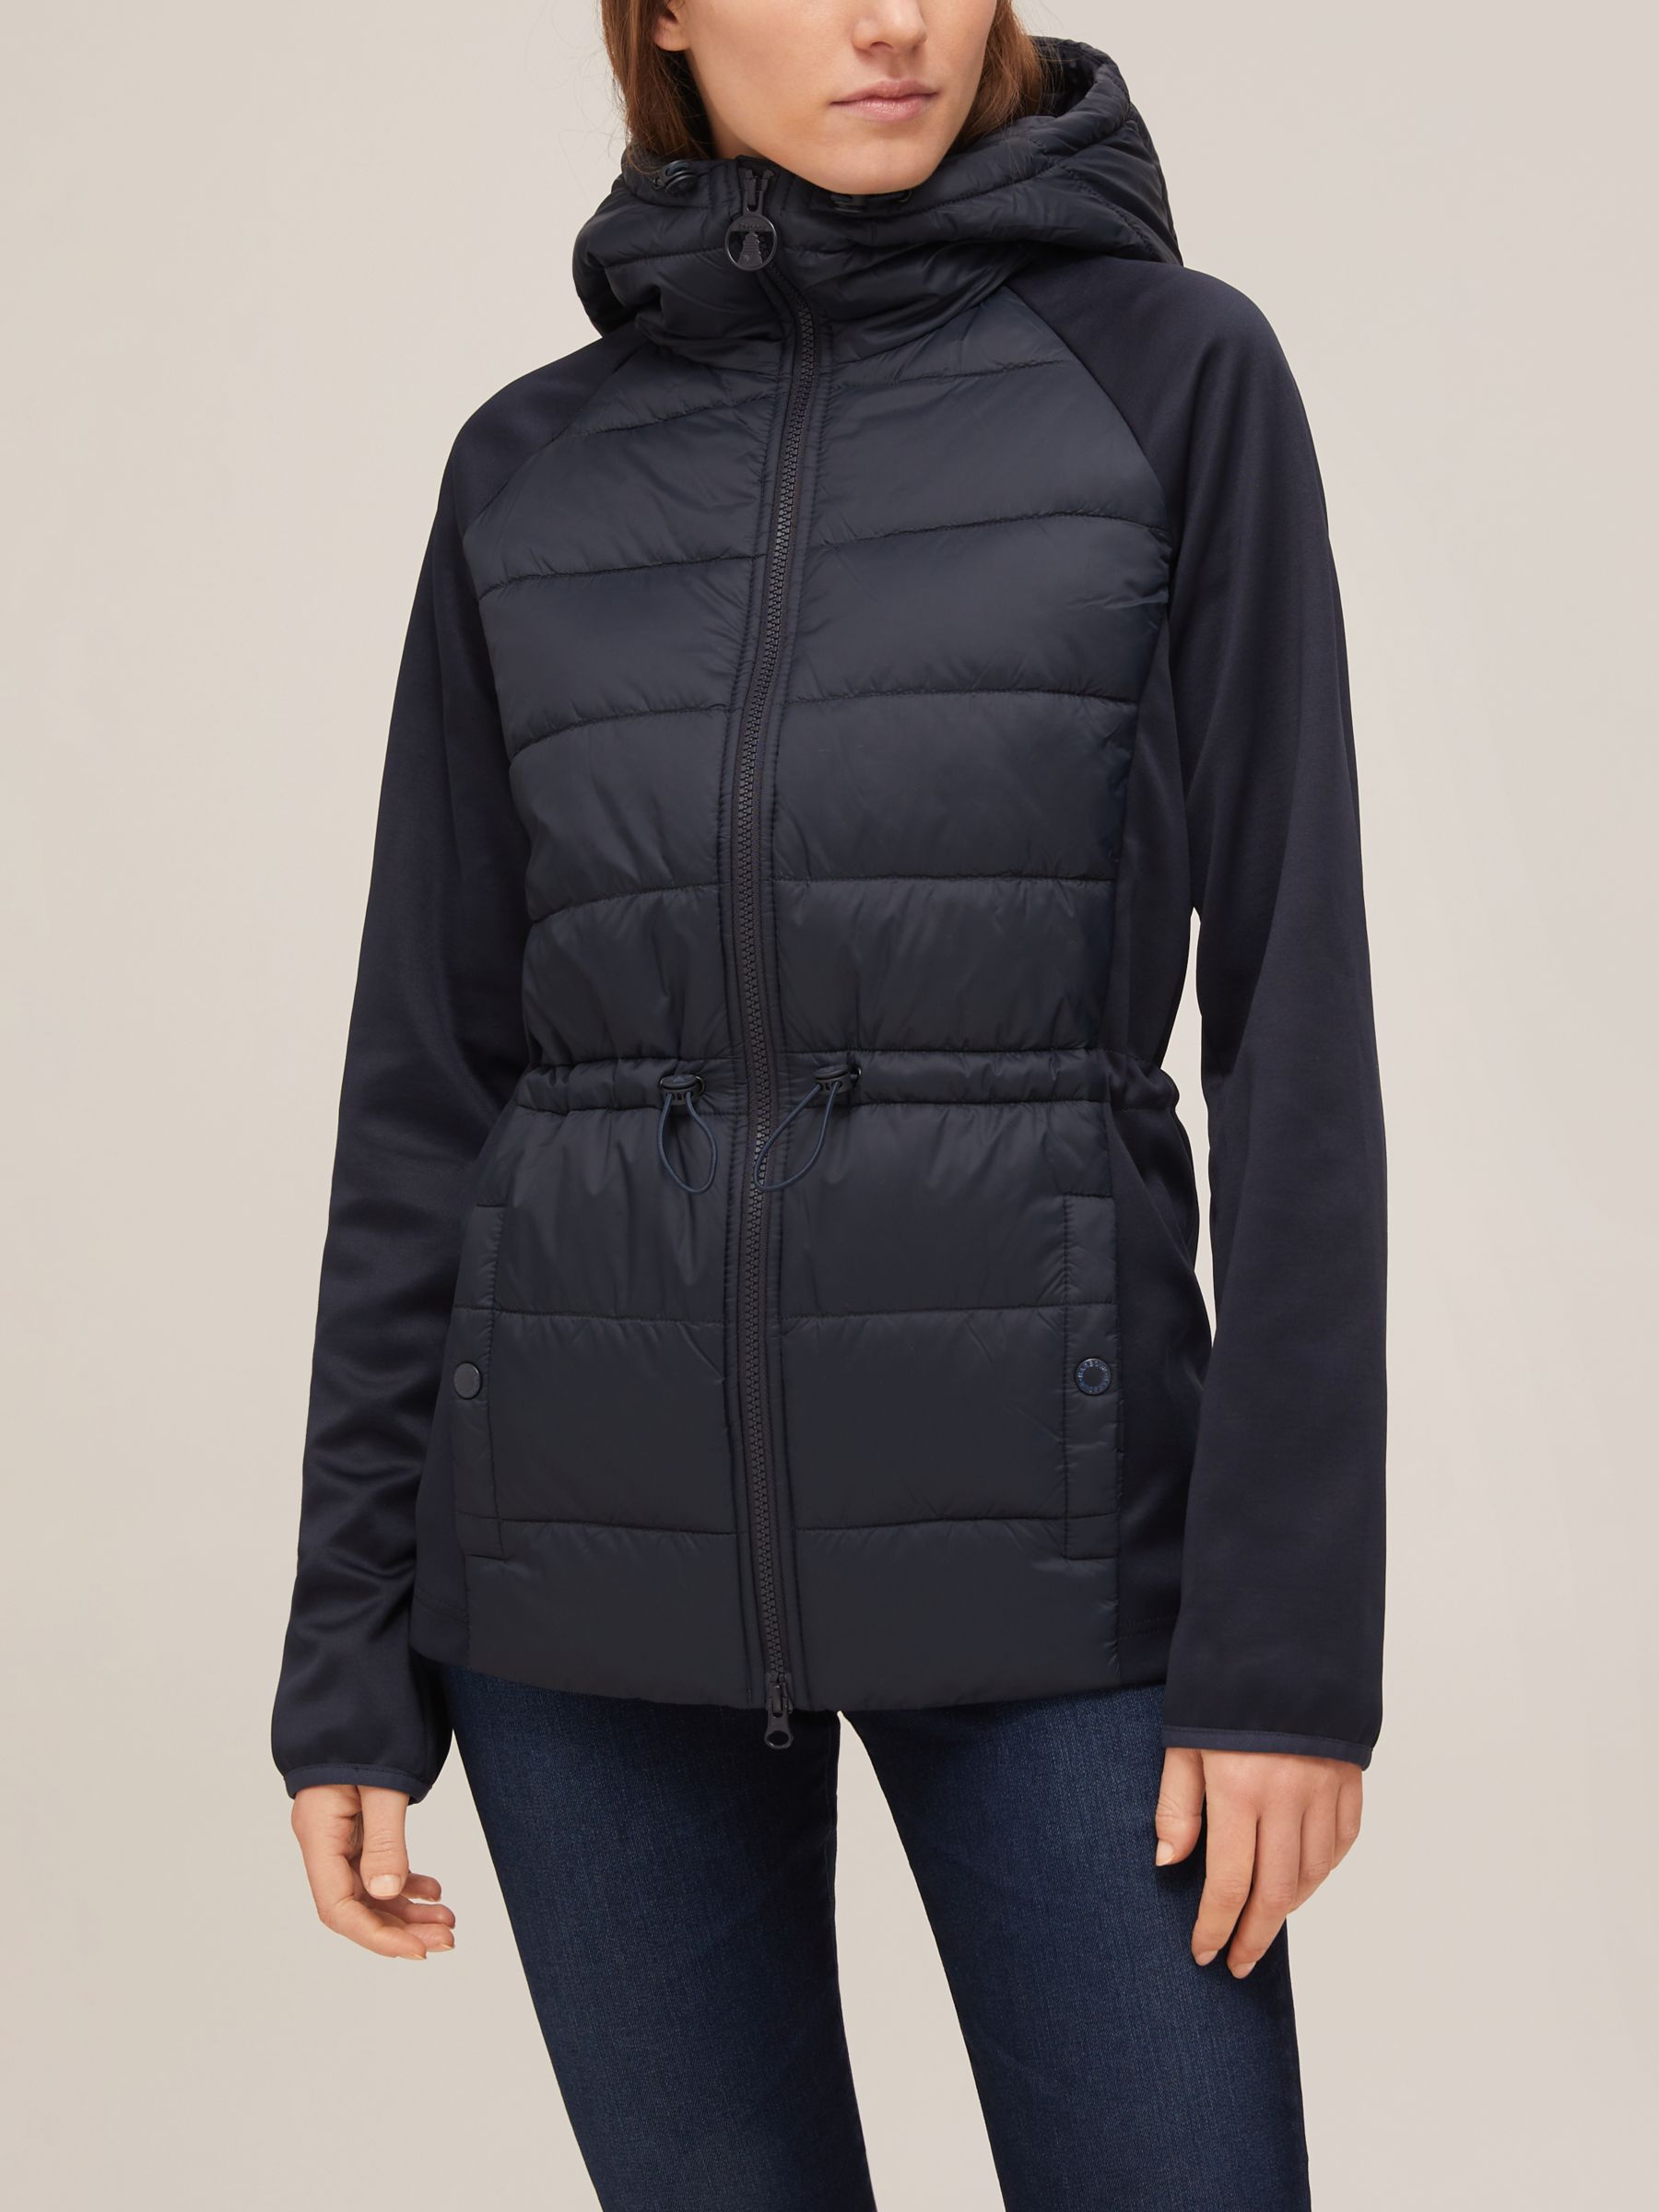 Barbour Prawle Quilted Hooded Jacket, Navy